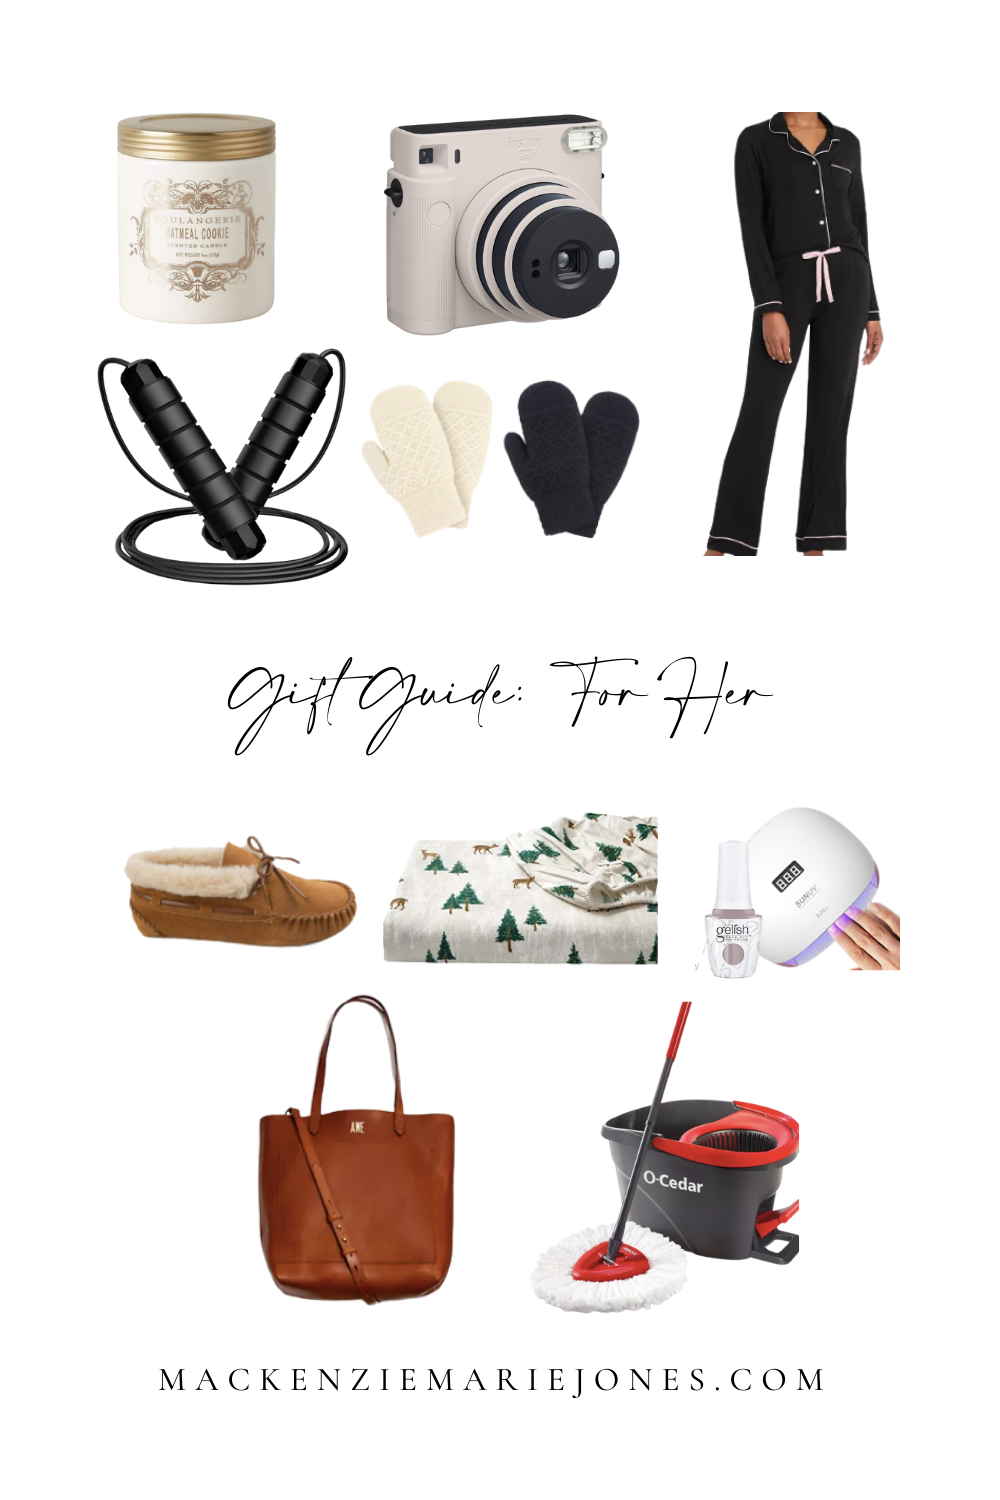 Ten Perfect Gifts for Women